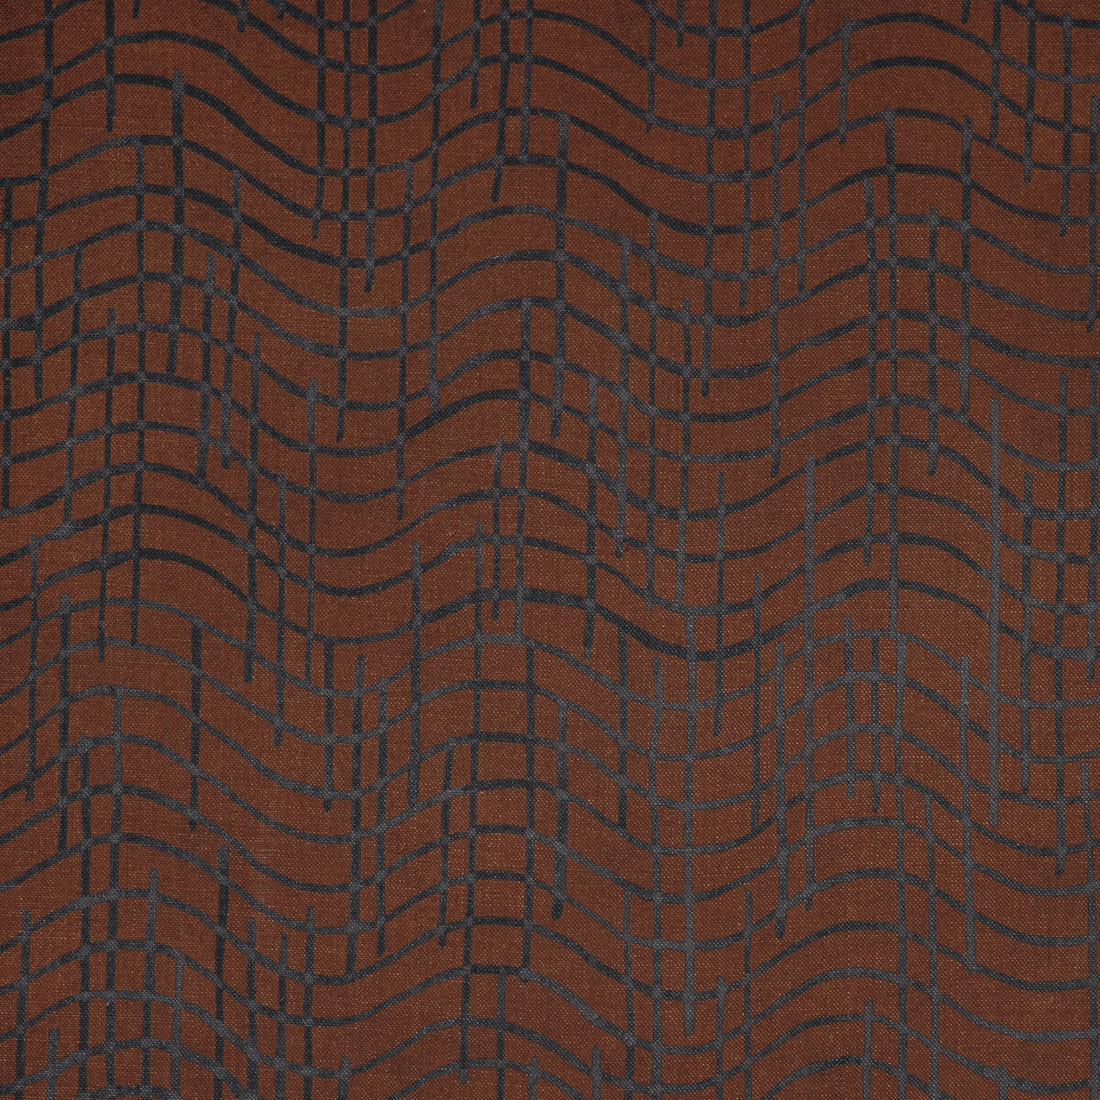 Dada fabric in russet color - pattern GWF-3789.24.0 - by Lee Jofa Modern in the Kelly Wearstler VII collection